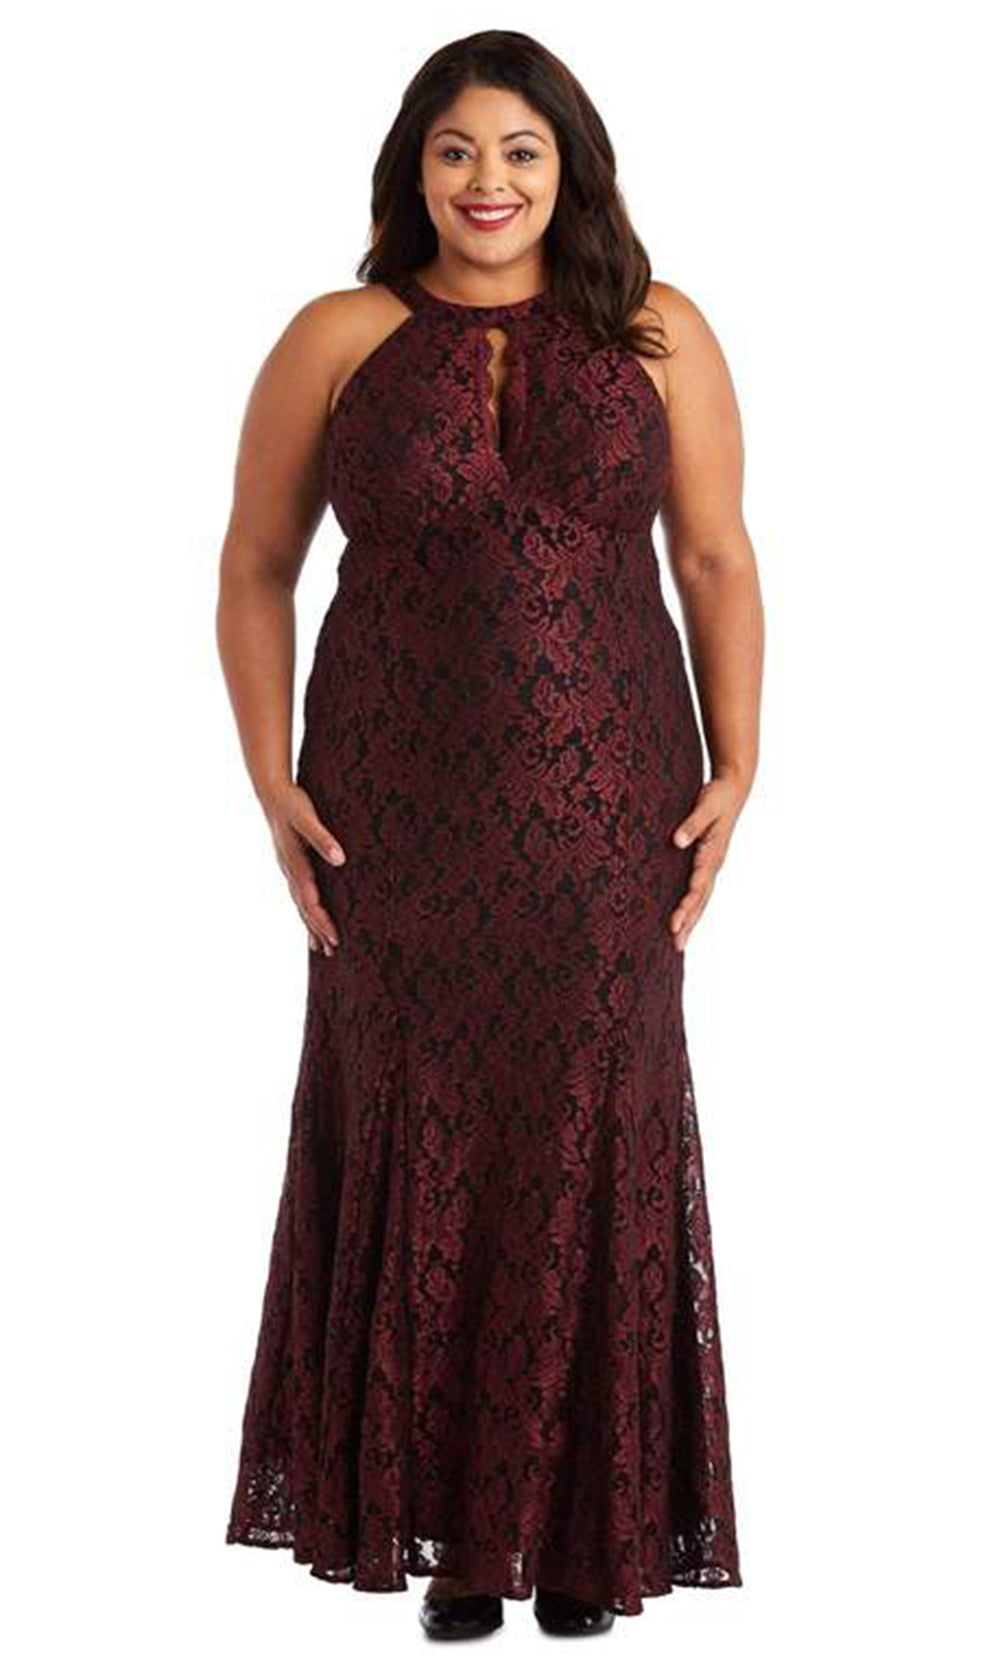 Nightway - 21689WSC Halter Neck Lace Glittered Dress Plus Size In Red and Black